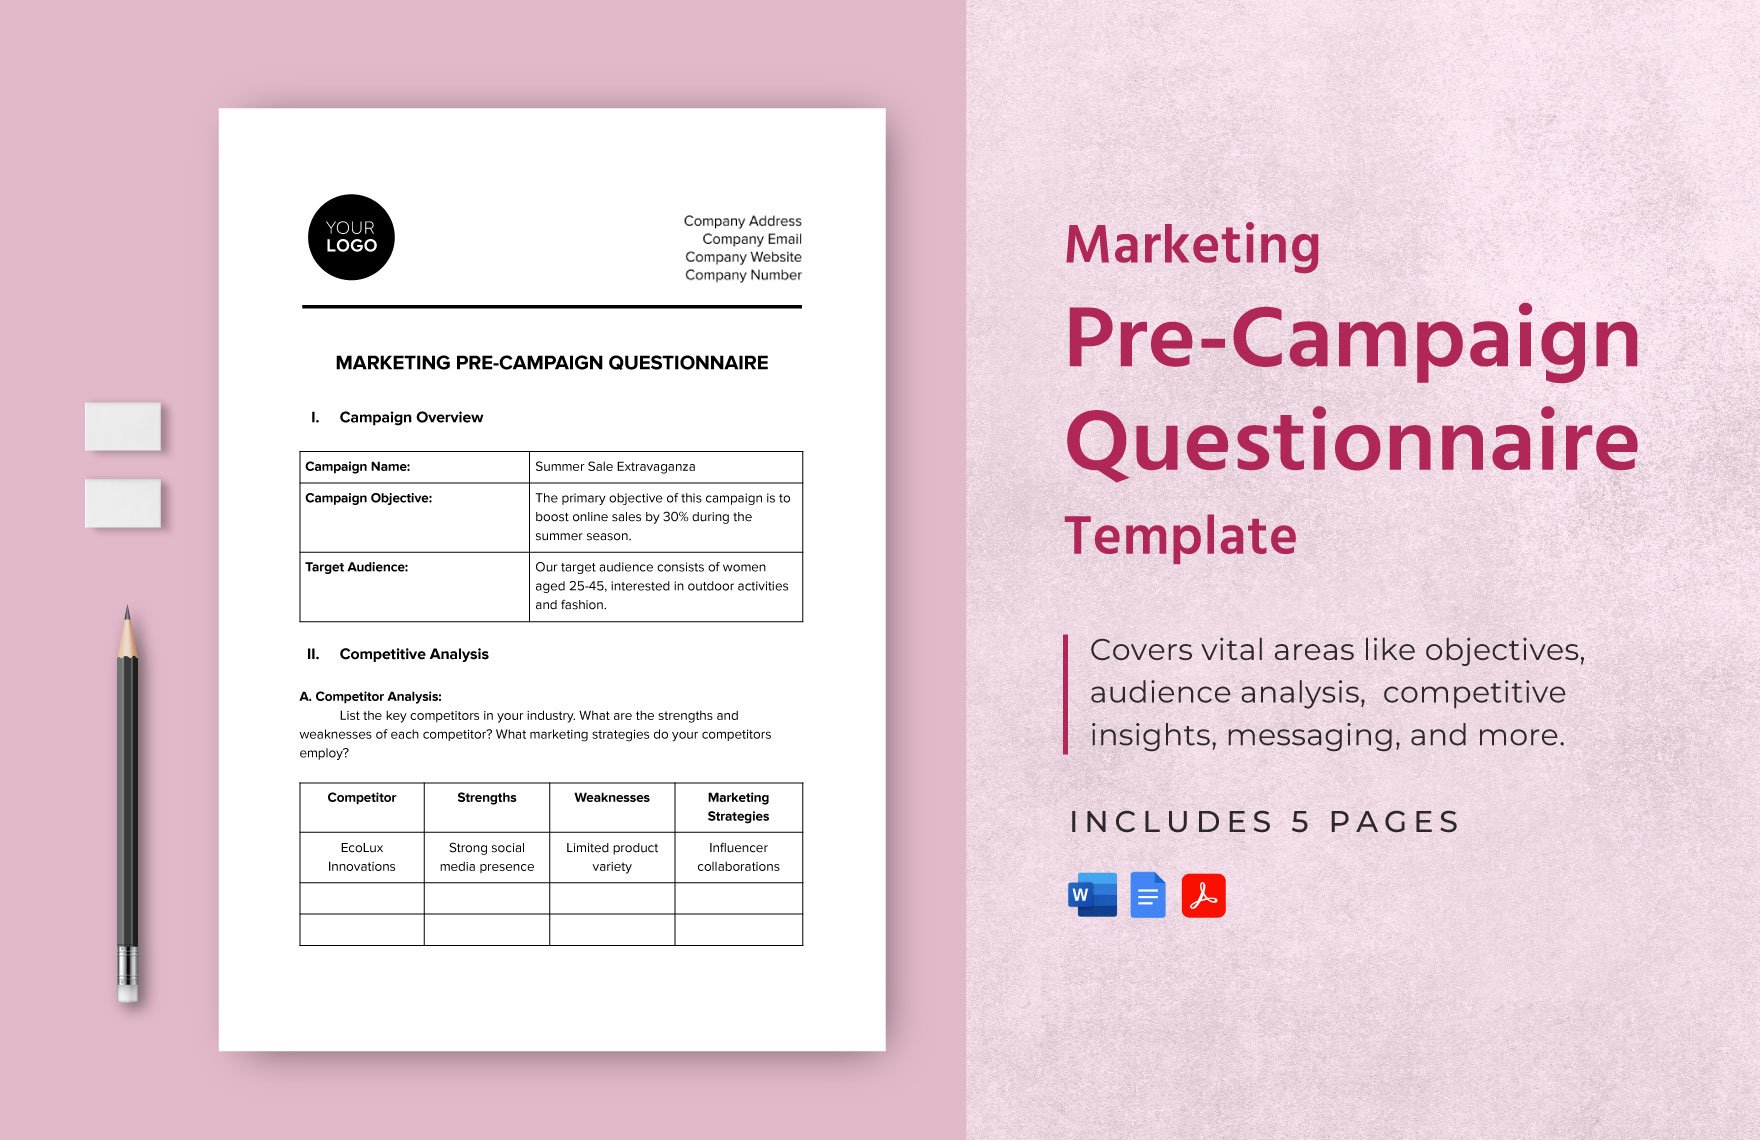 Marketing Pre-Campaign Questionnaire Template in Word, Google Docs, PDF